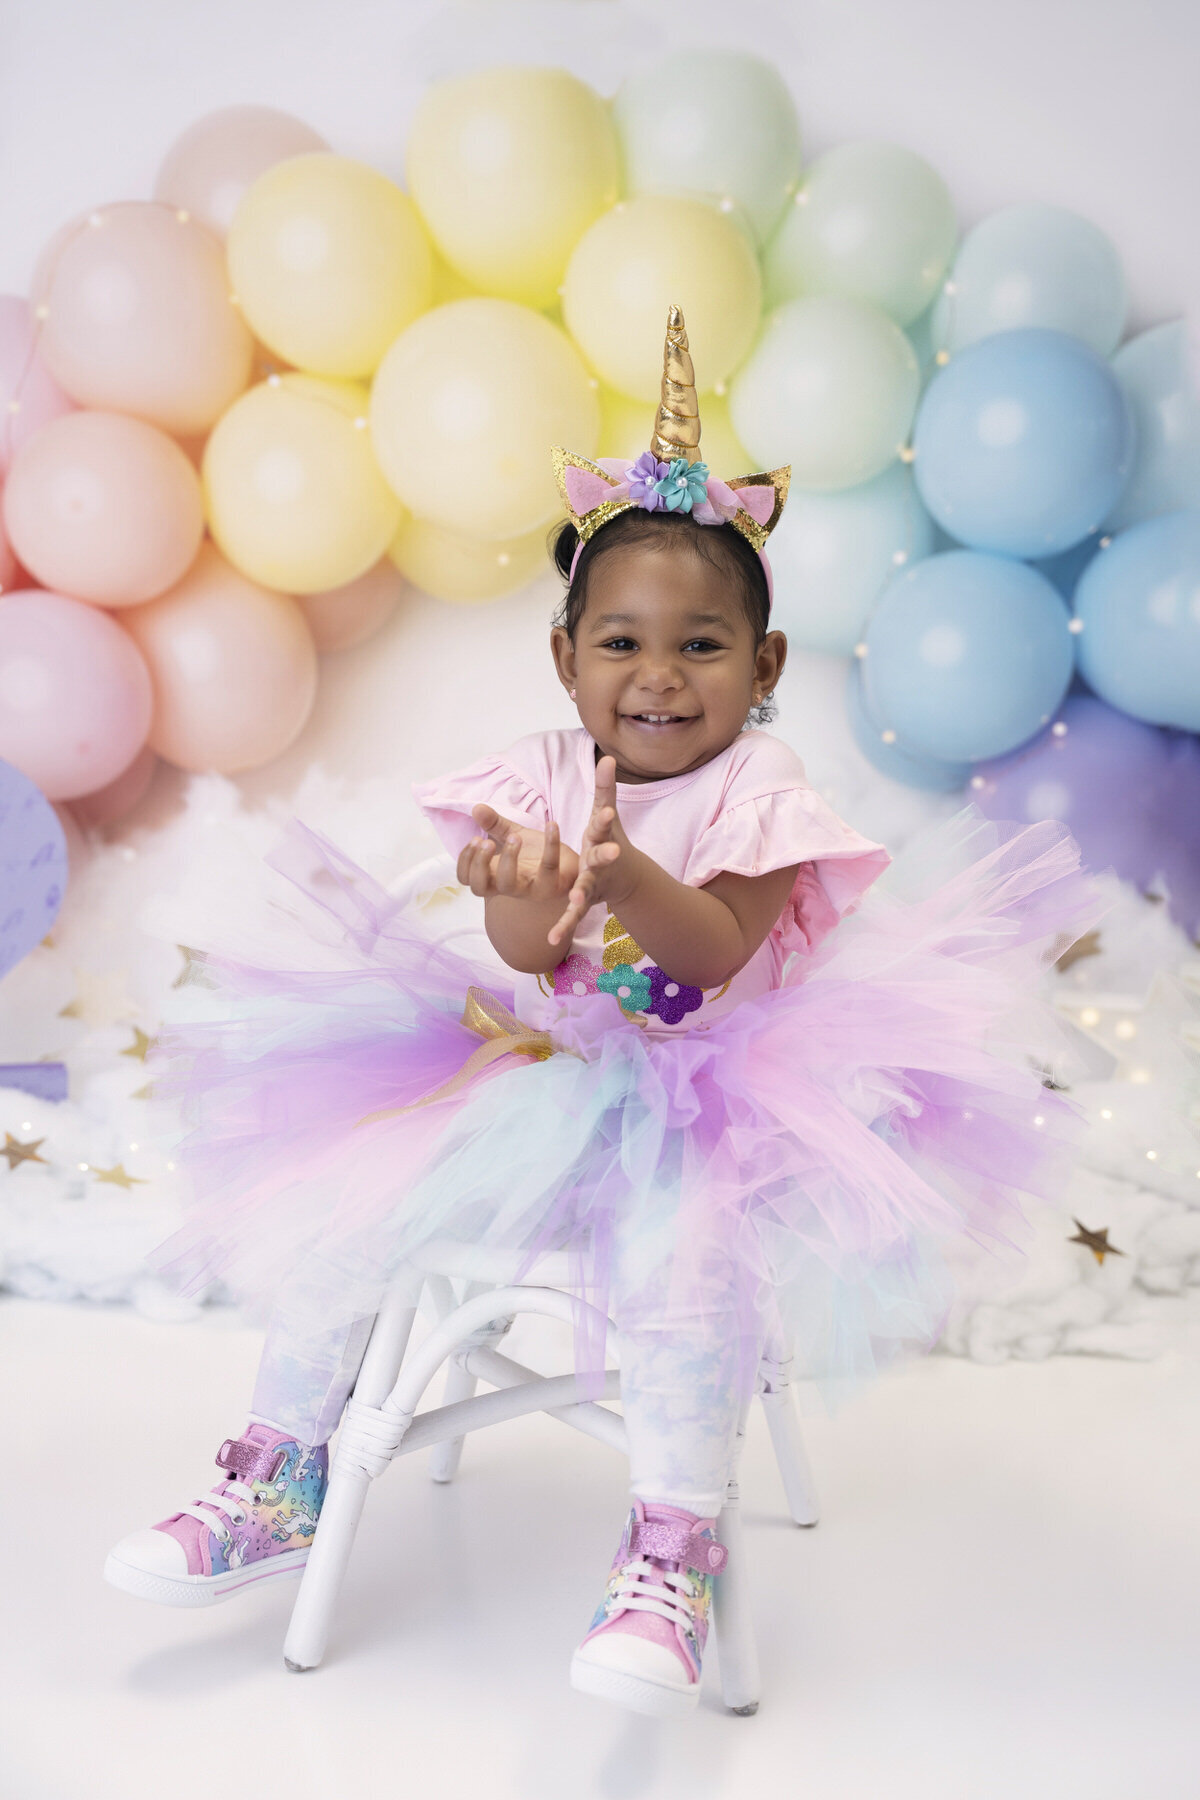 15 Unicorn themed portrait session 1 year old